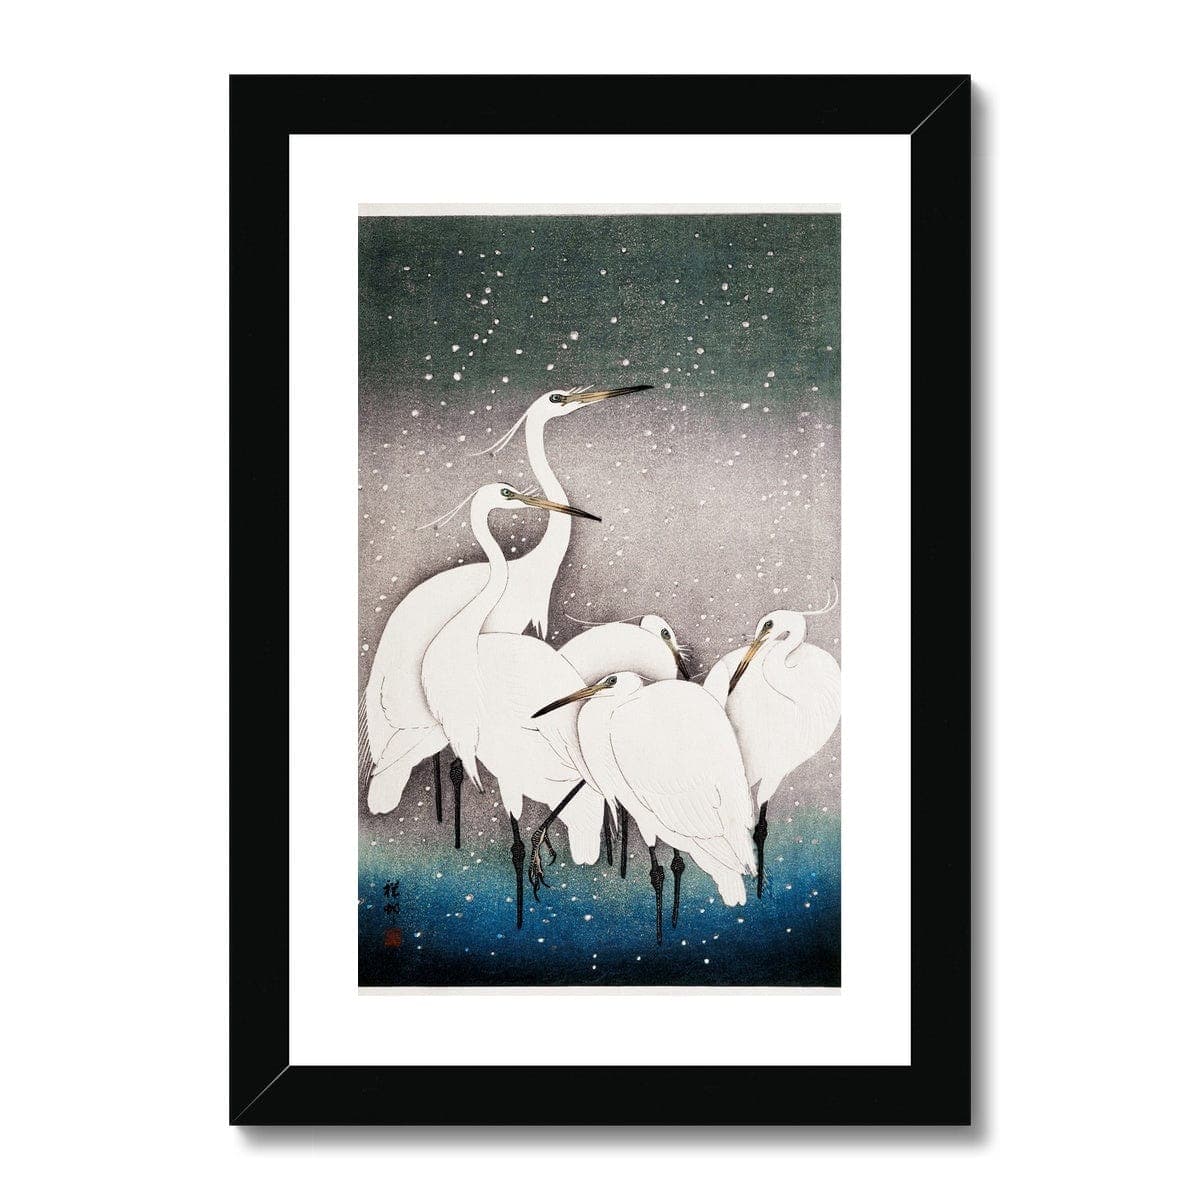 Group of Egrets (1925 - 1936) by Ohara Koson (1877-1945) Framed & Mounted Print